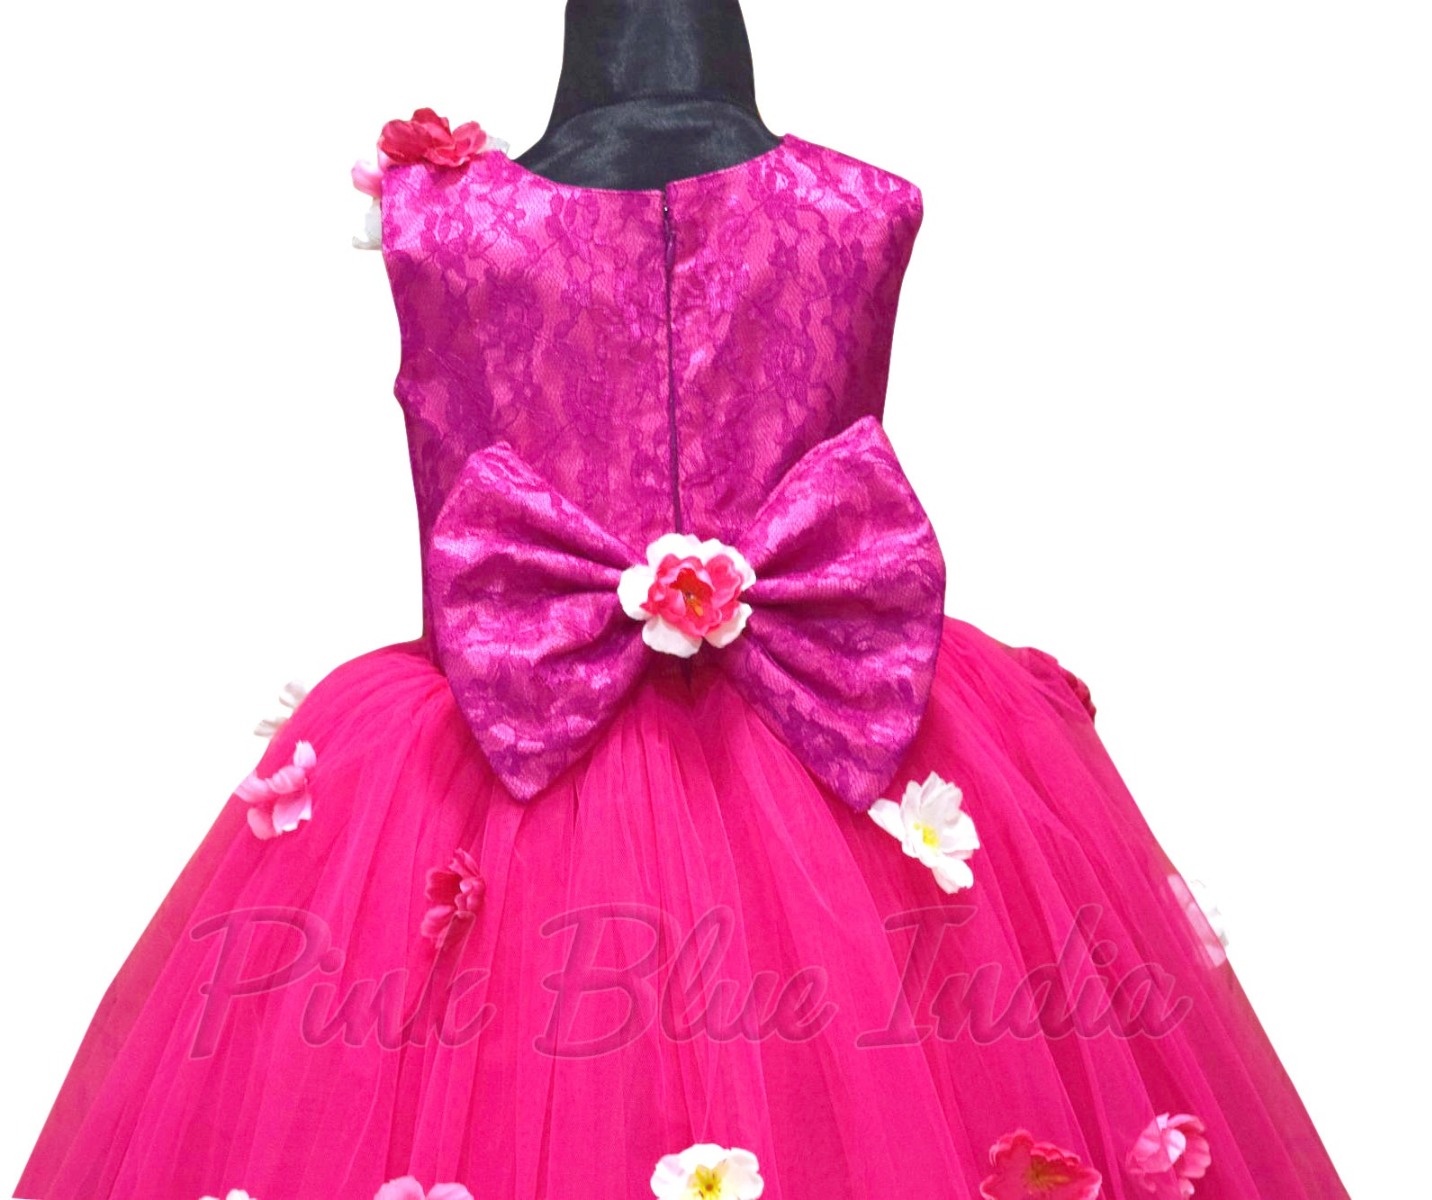 15 Beautiful 6 Years Girl Party Dresses and Gowns Designs